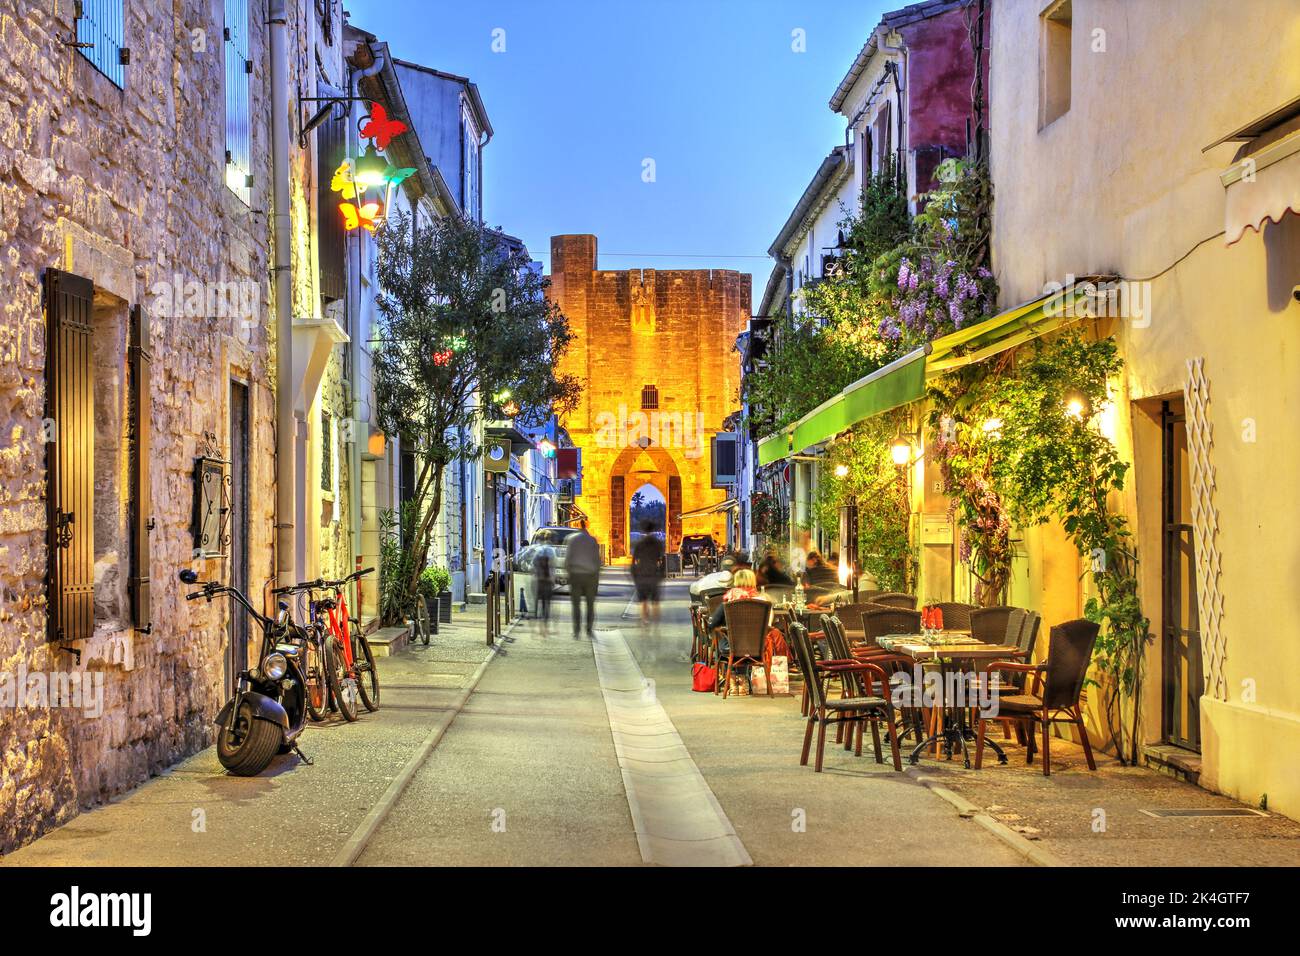 Street leading to Organeau Gate in Aigues-Mortes, Camargue, Occitanie, France at night. Stock Photo